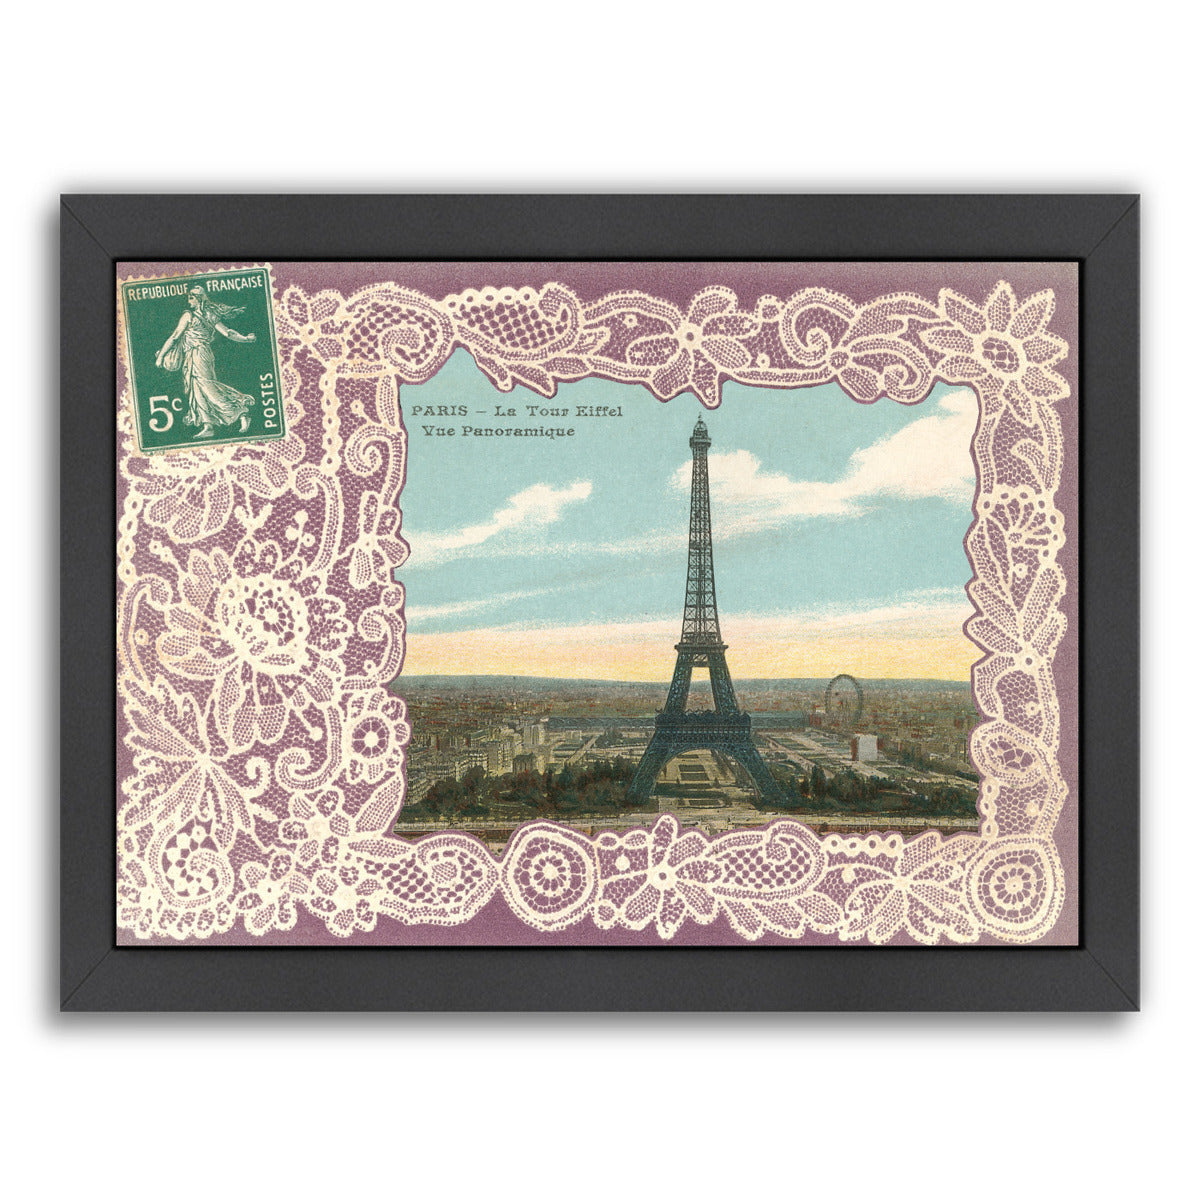 Eiffel Tower Postcard Stamp by Found Image Press Framed Print - Americanflat